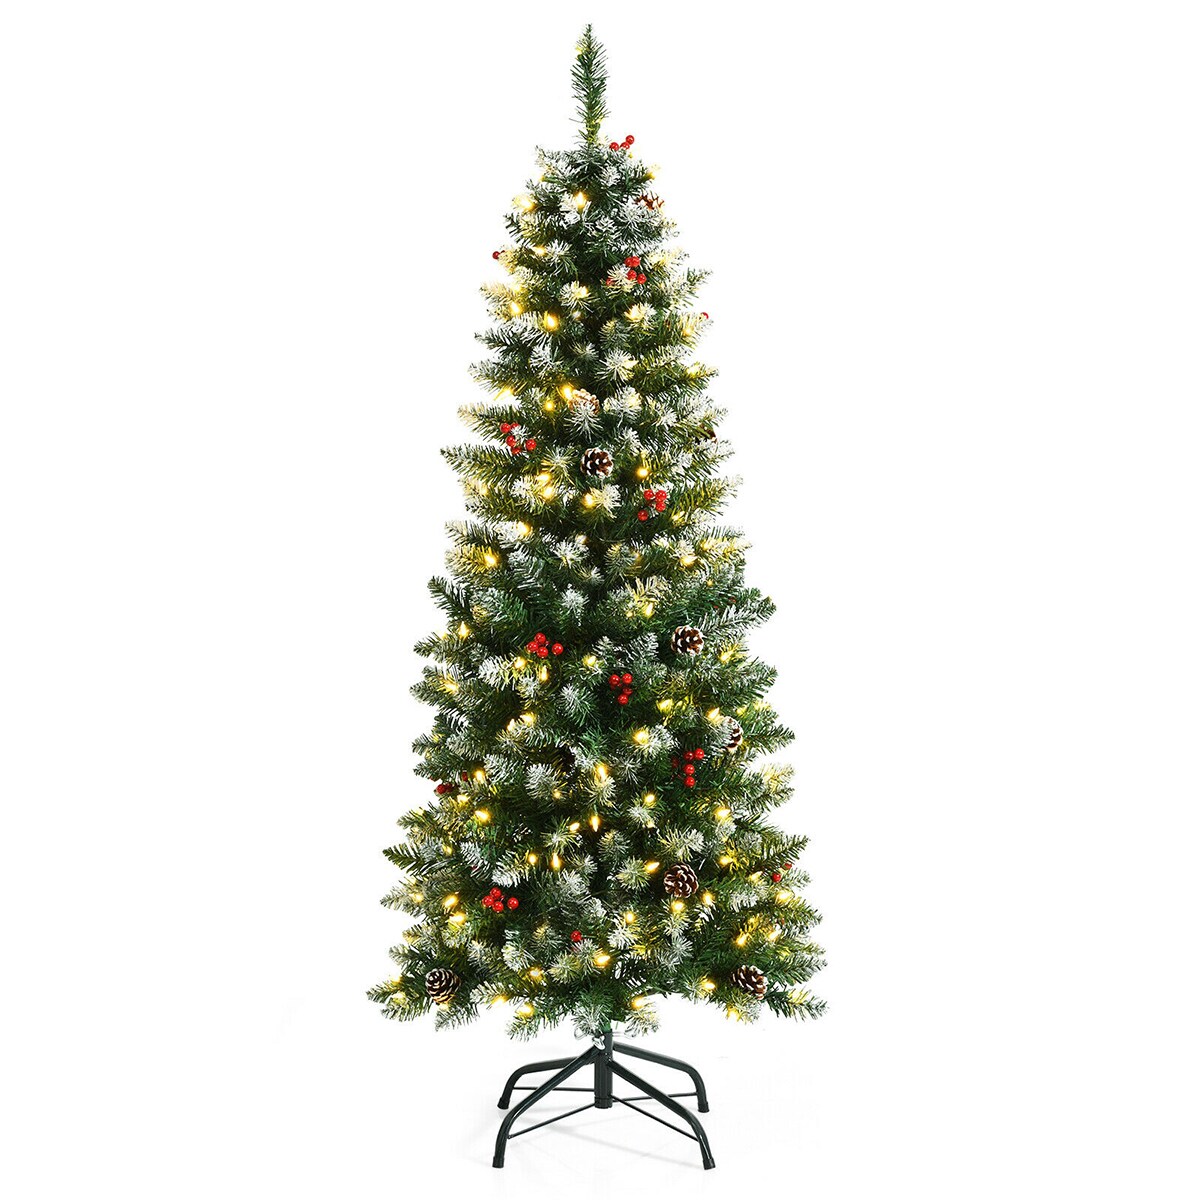 Forclover 5-ft Pre-lit Artificial Christmas Tree with LED Lights in the ...